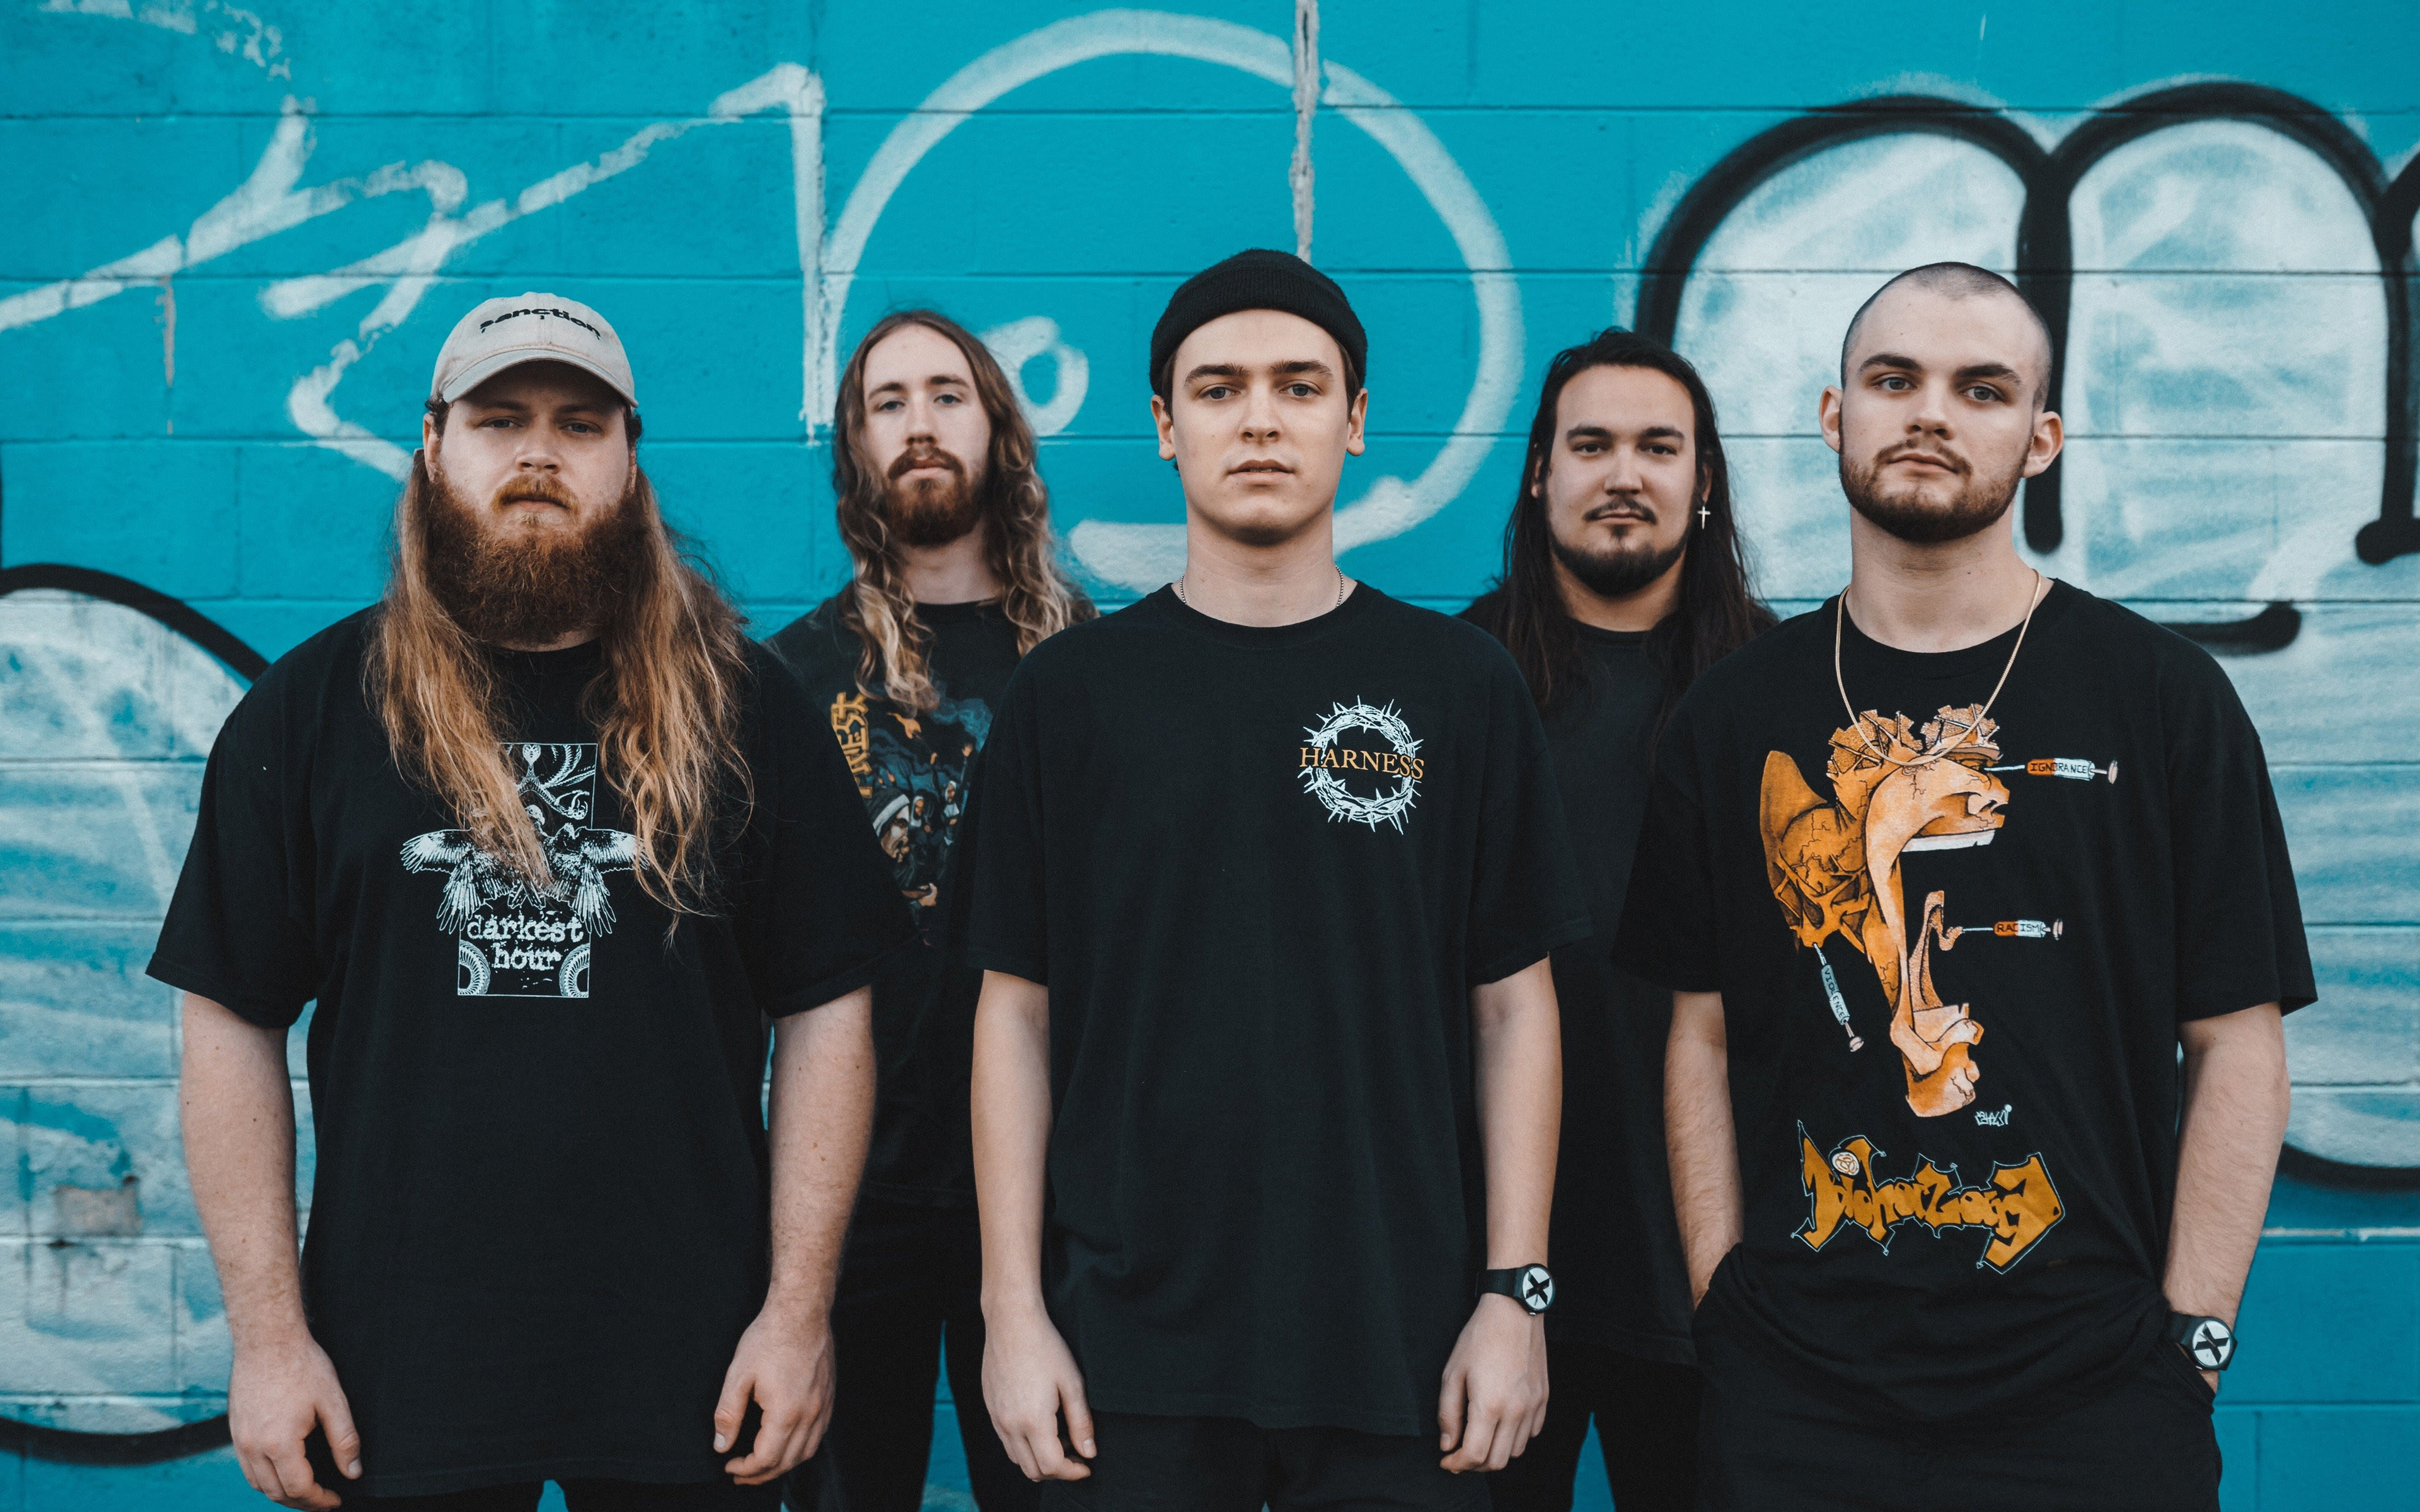 Download wallpapers 4k Knocked Loose 2019 american band guys